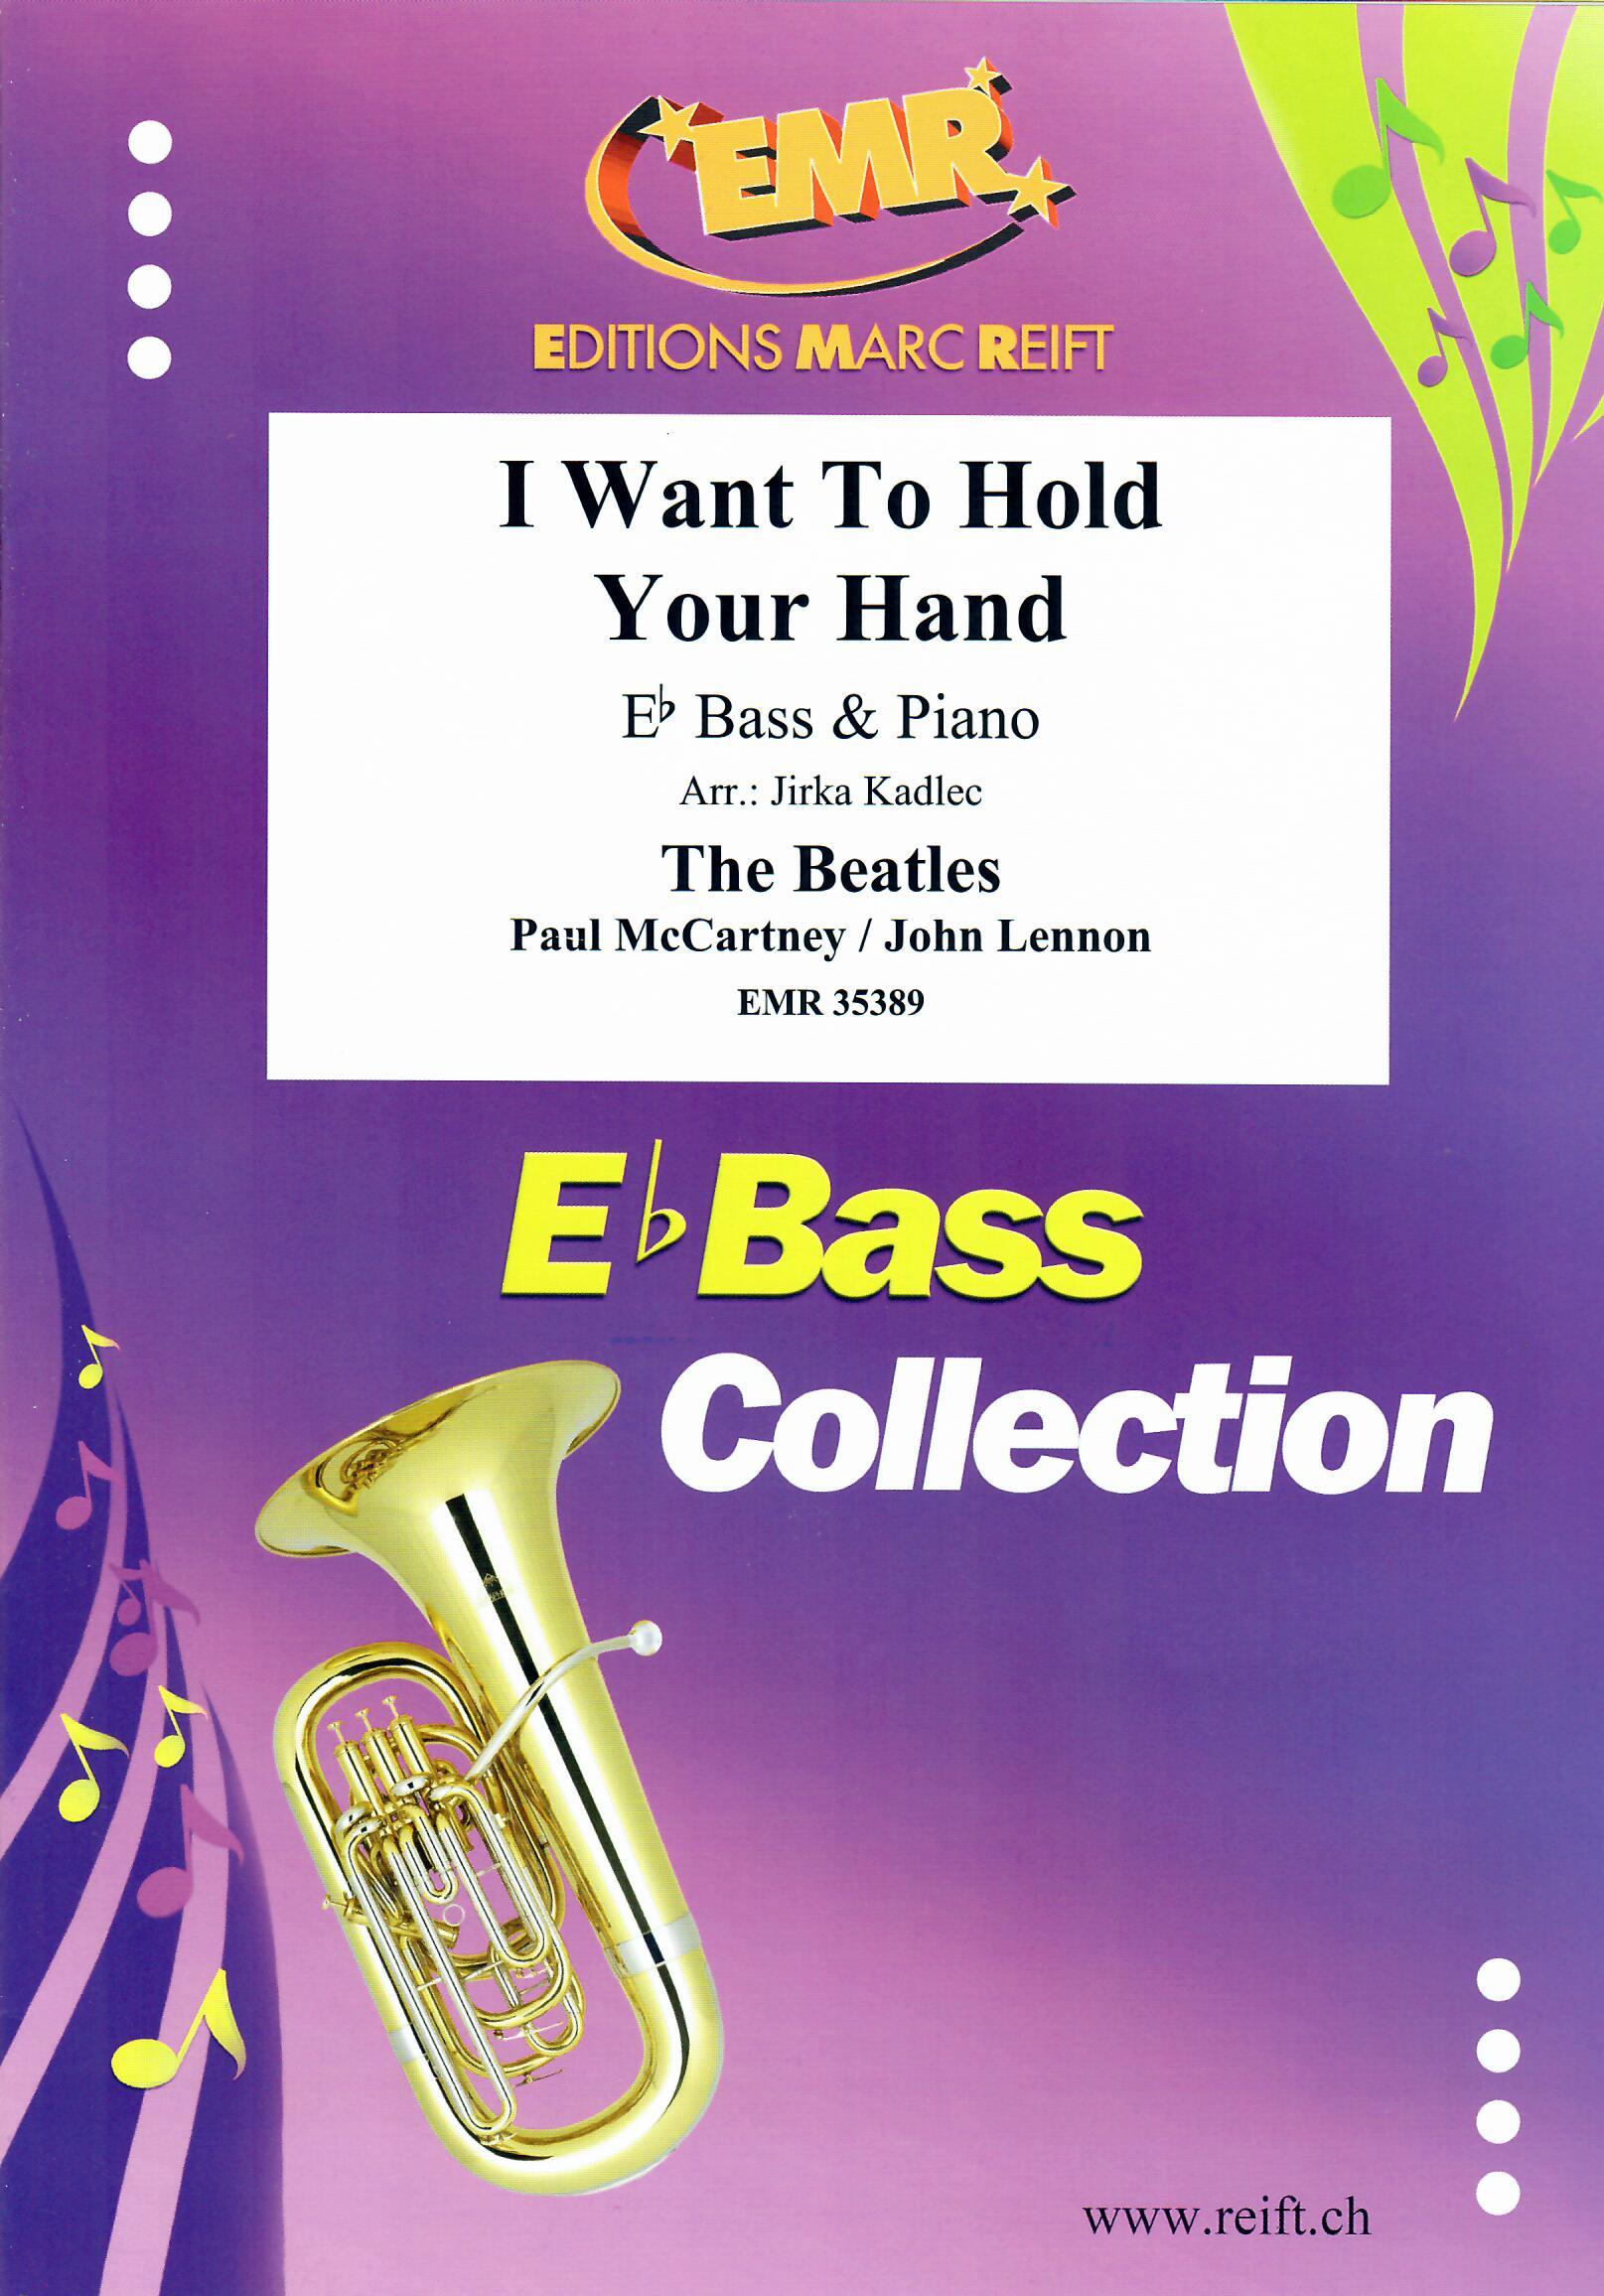 I WANT TO HOLD YOUR HAND, SOLOS - E♭. Bass